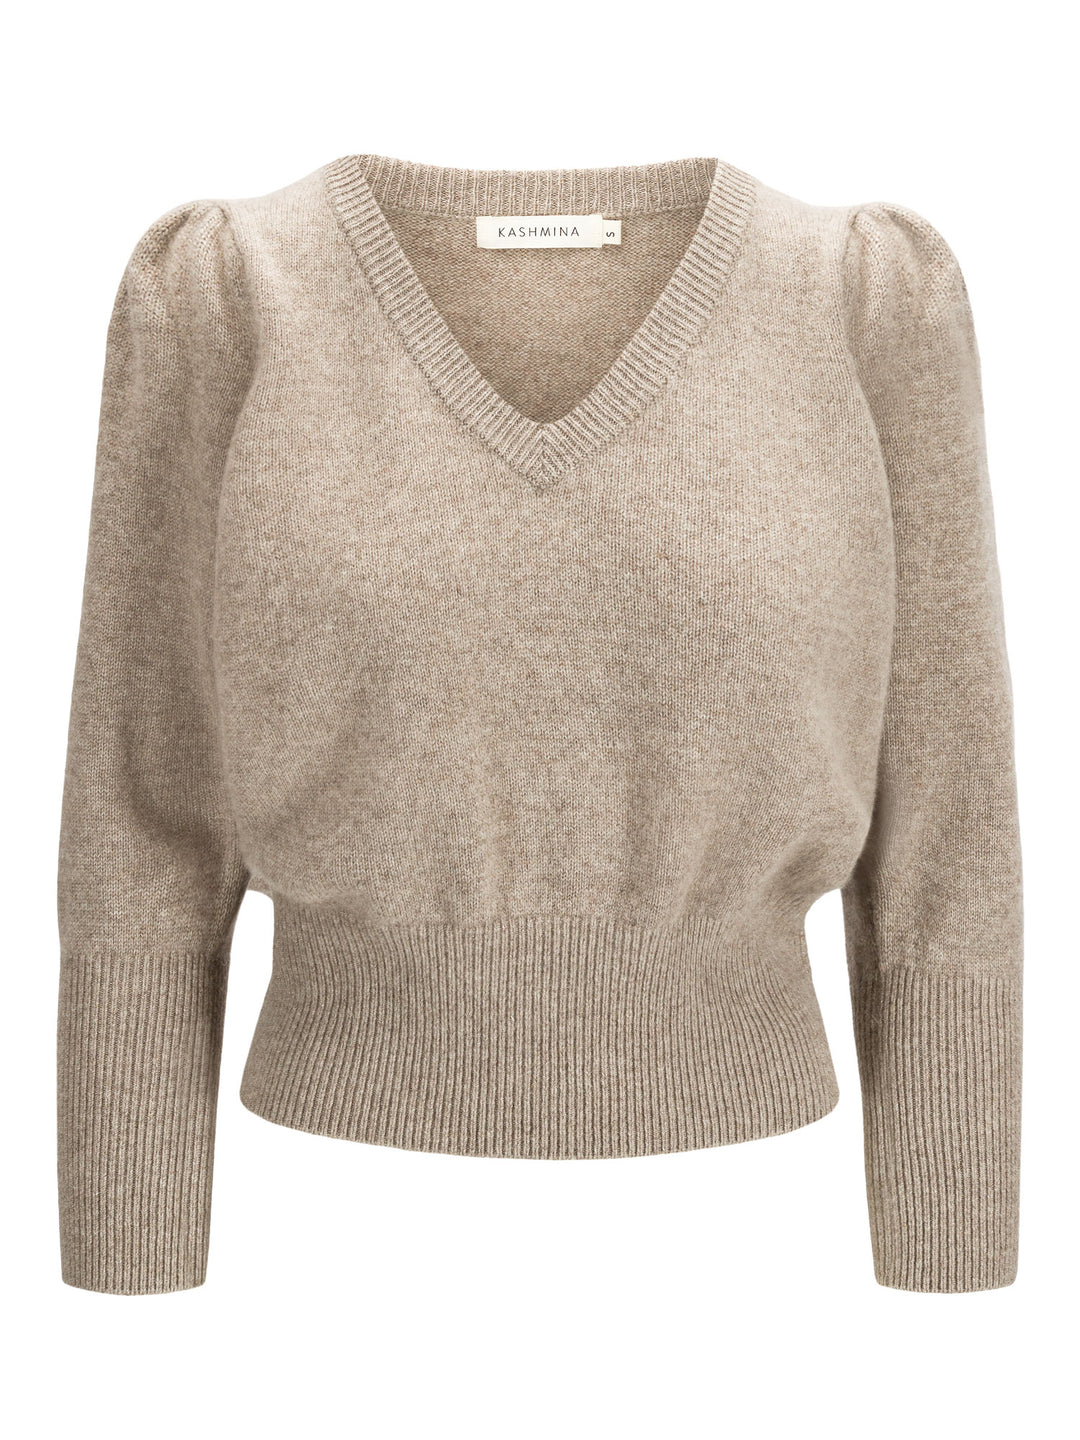 Cashmere sweater "Swan". Puff sleeve, 100% pure cashmere from Kashmina